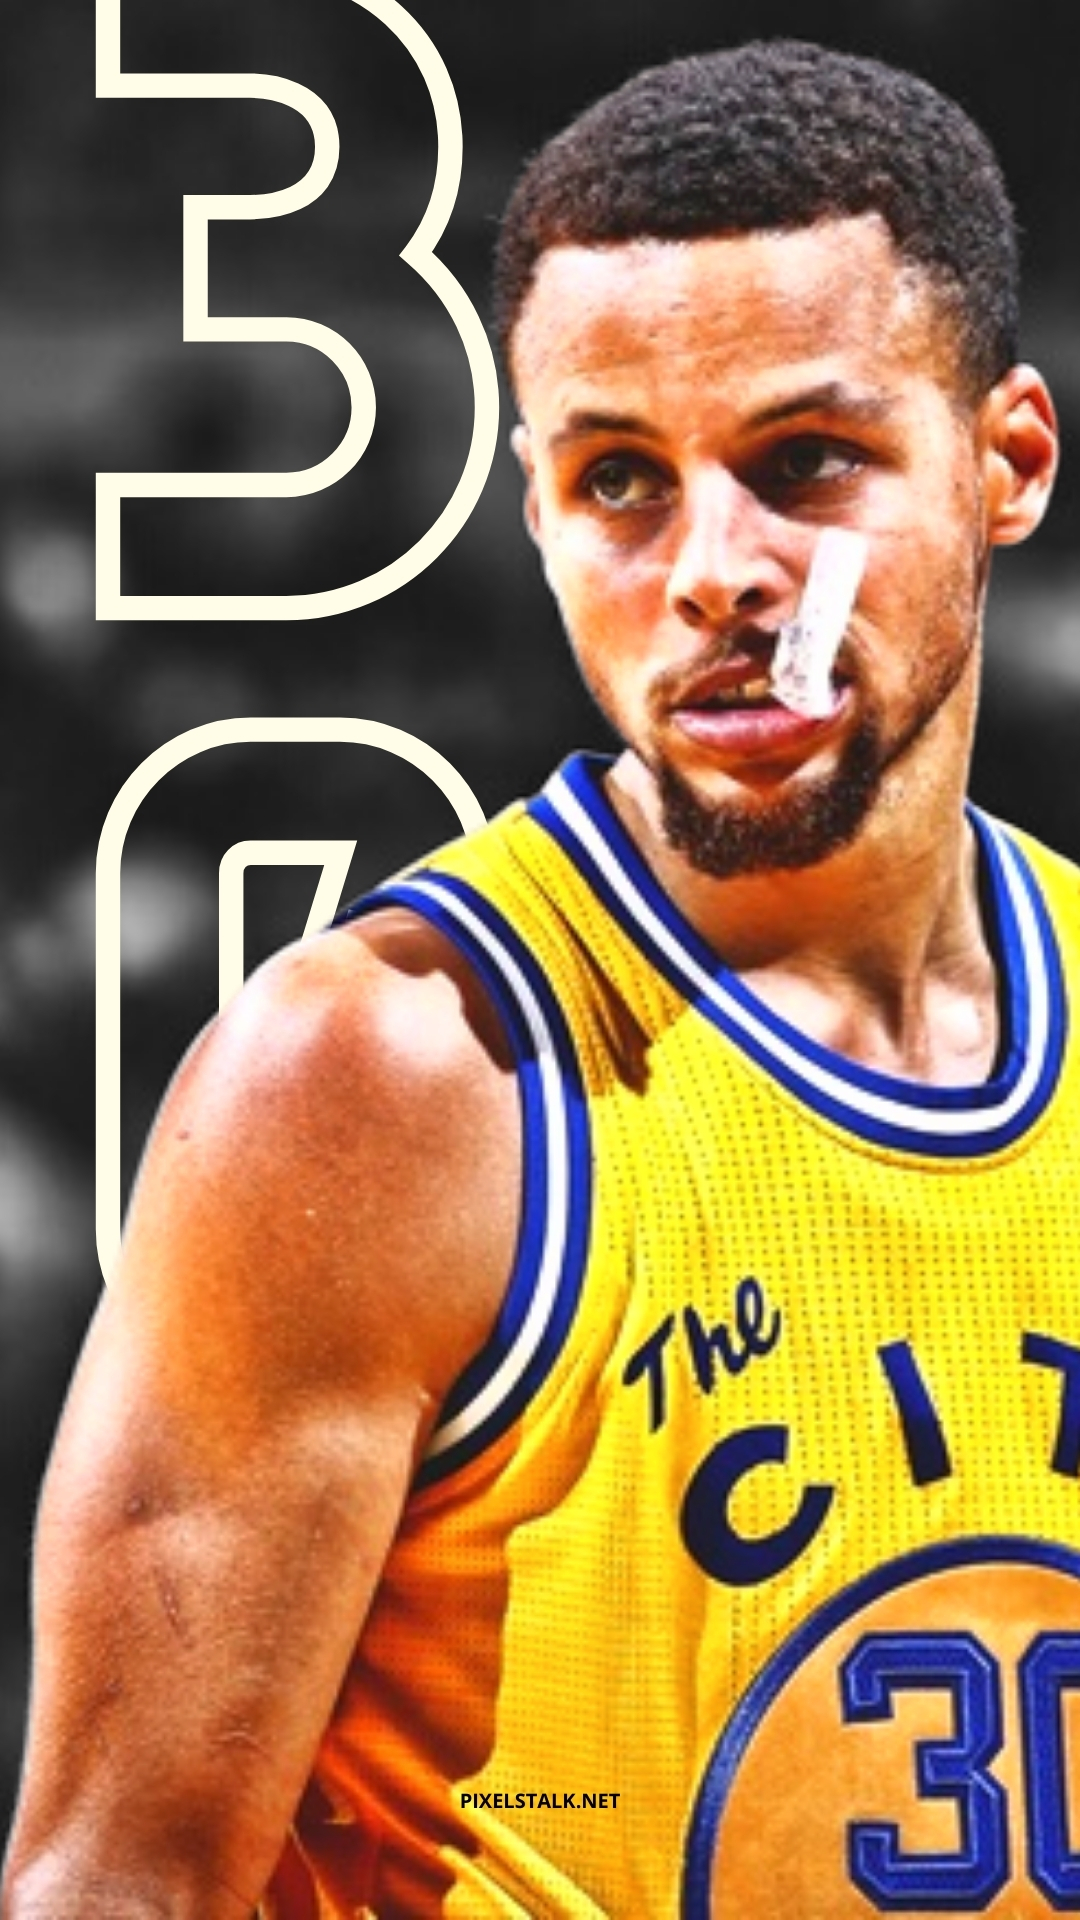 HD steph curry wallpapers